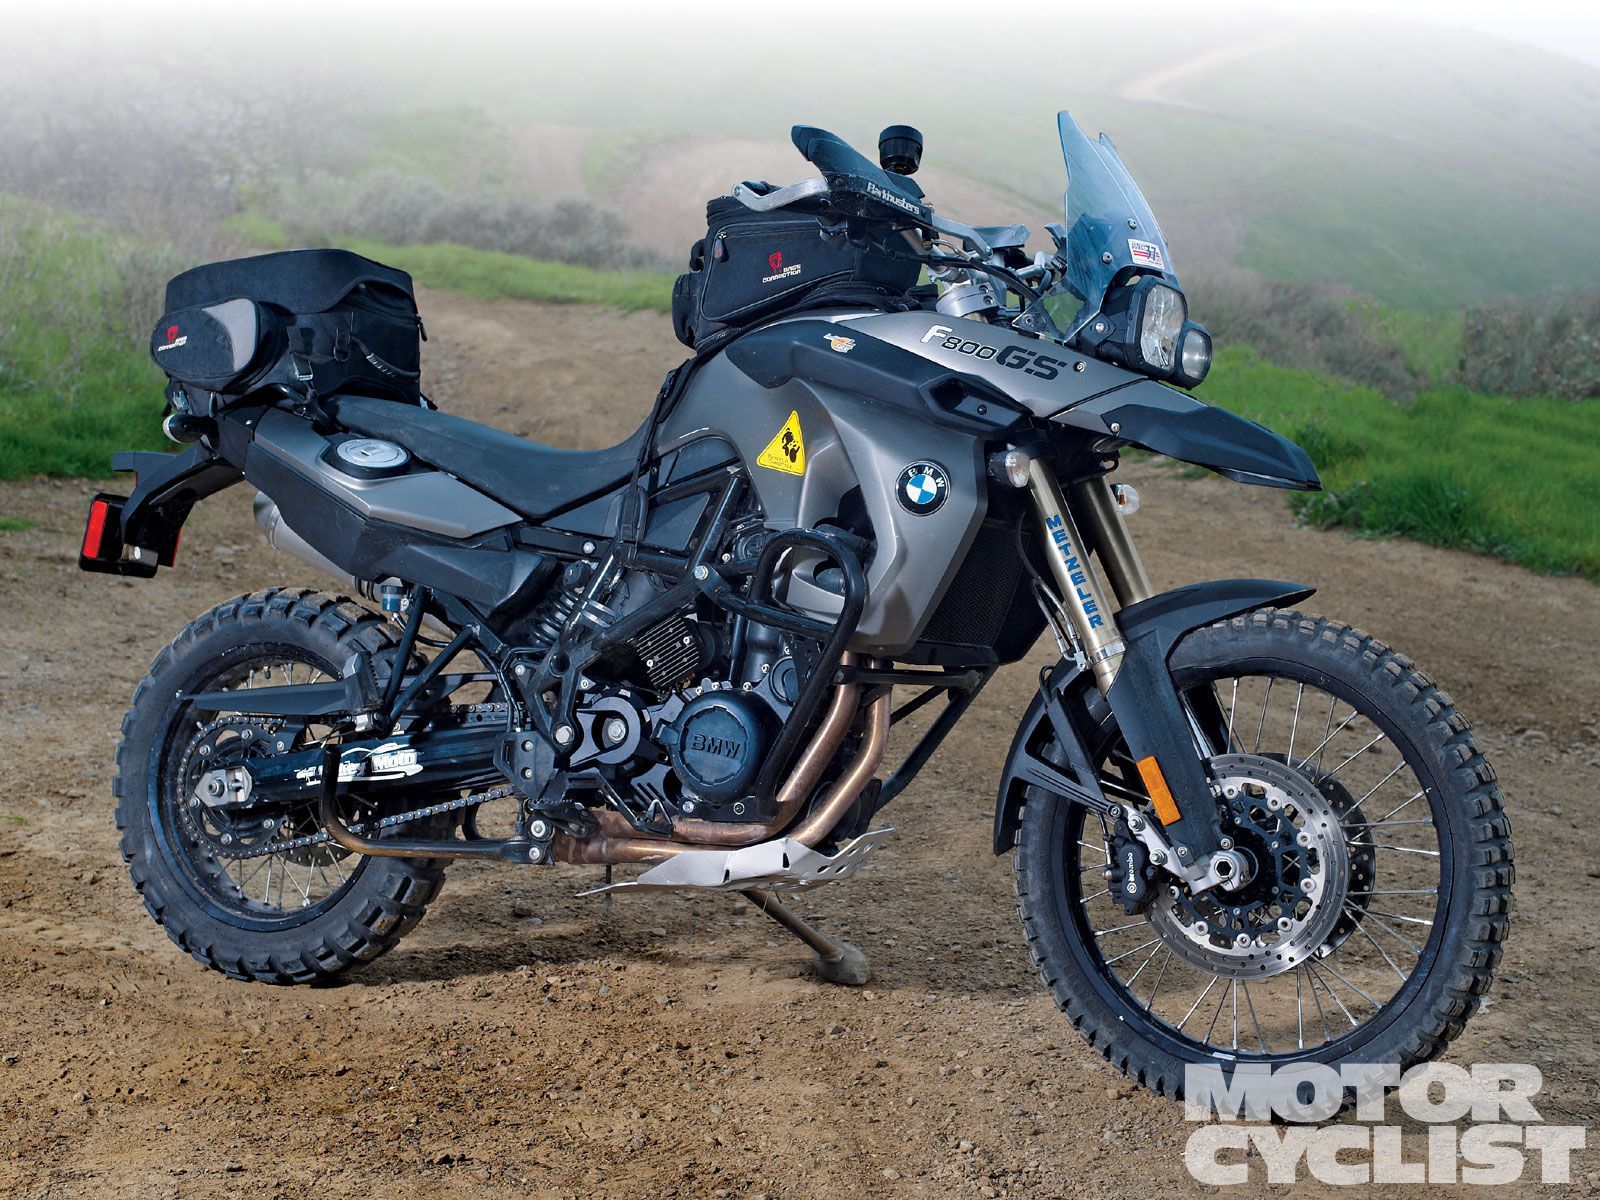 BMW F800gs Star Warrior Forum, Yamaha Star Warrior Forums. Adventure bike, Motorcycle camping gear, Motorcycle camping